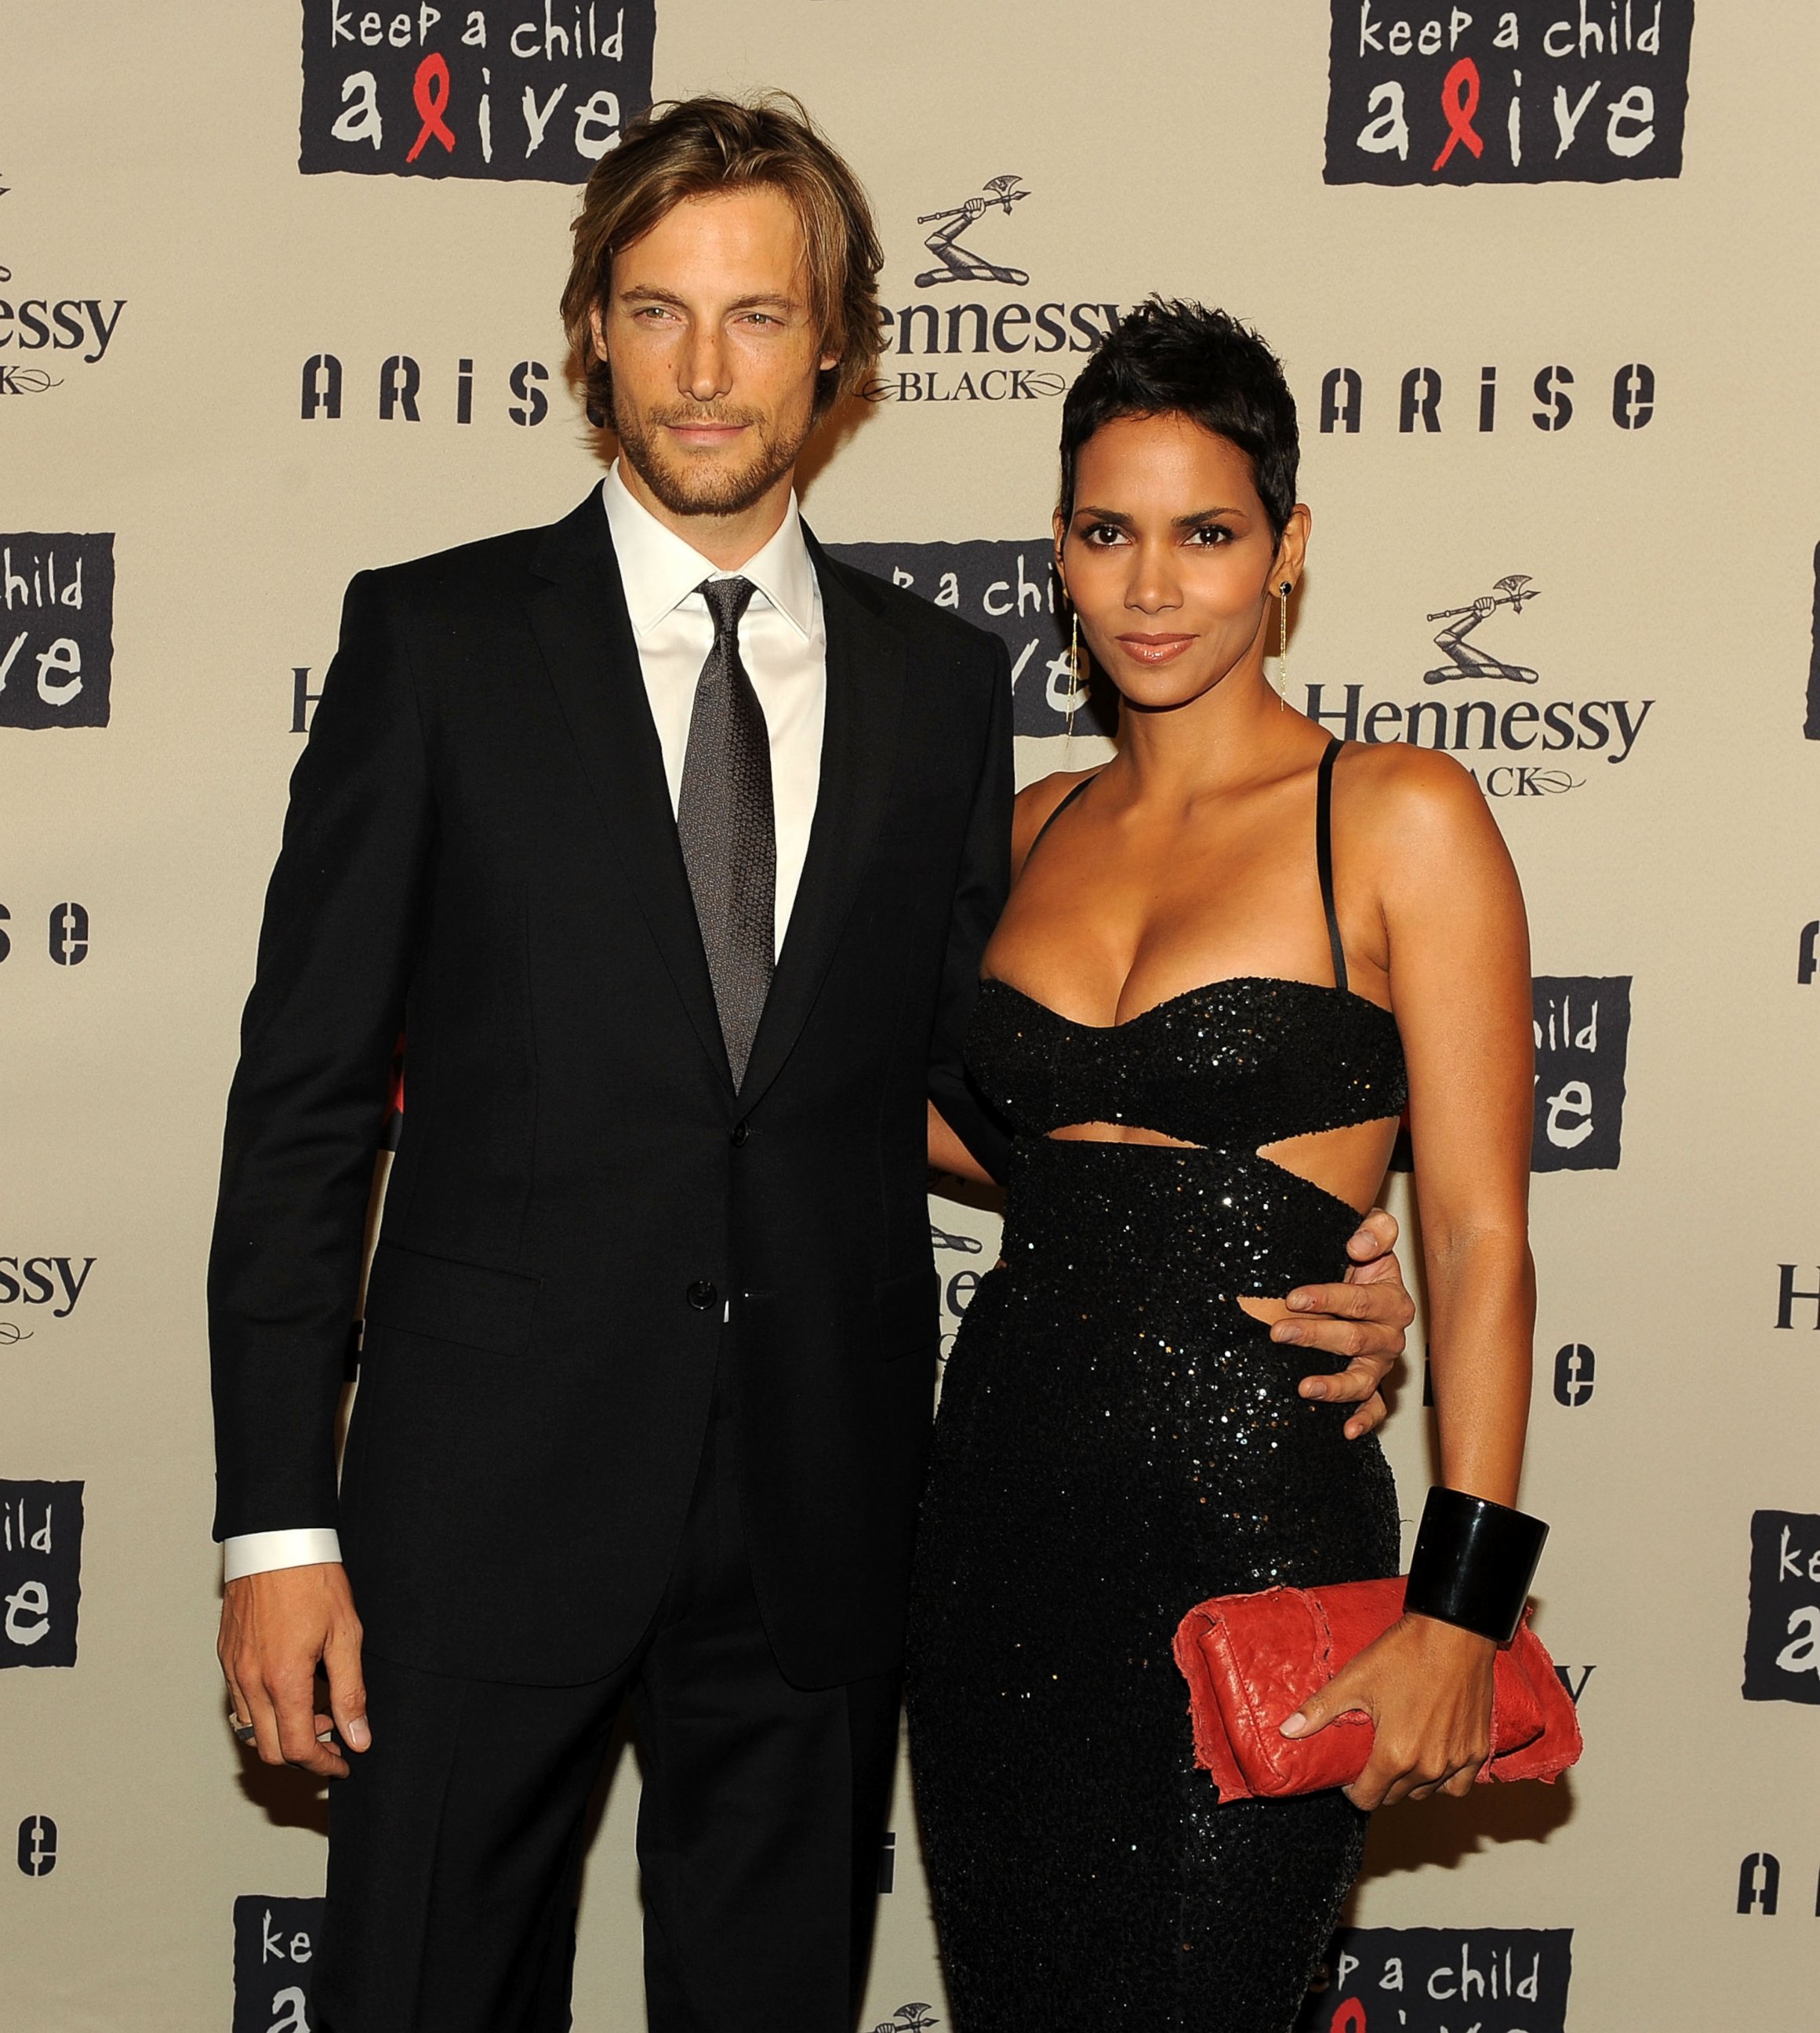 PHOTO: Gabriel Aubry and Halle Berry attend Keep A Child Alive's 6th Annual Black Ball at Hammerstein Ballroom, Oct. 15, 2009 in New York. 